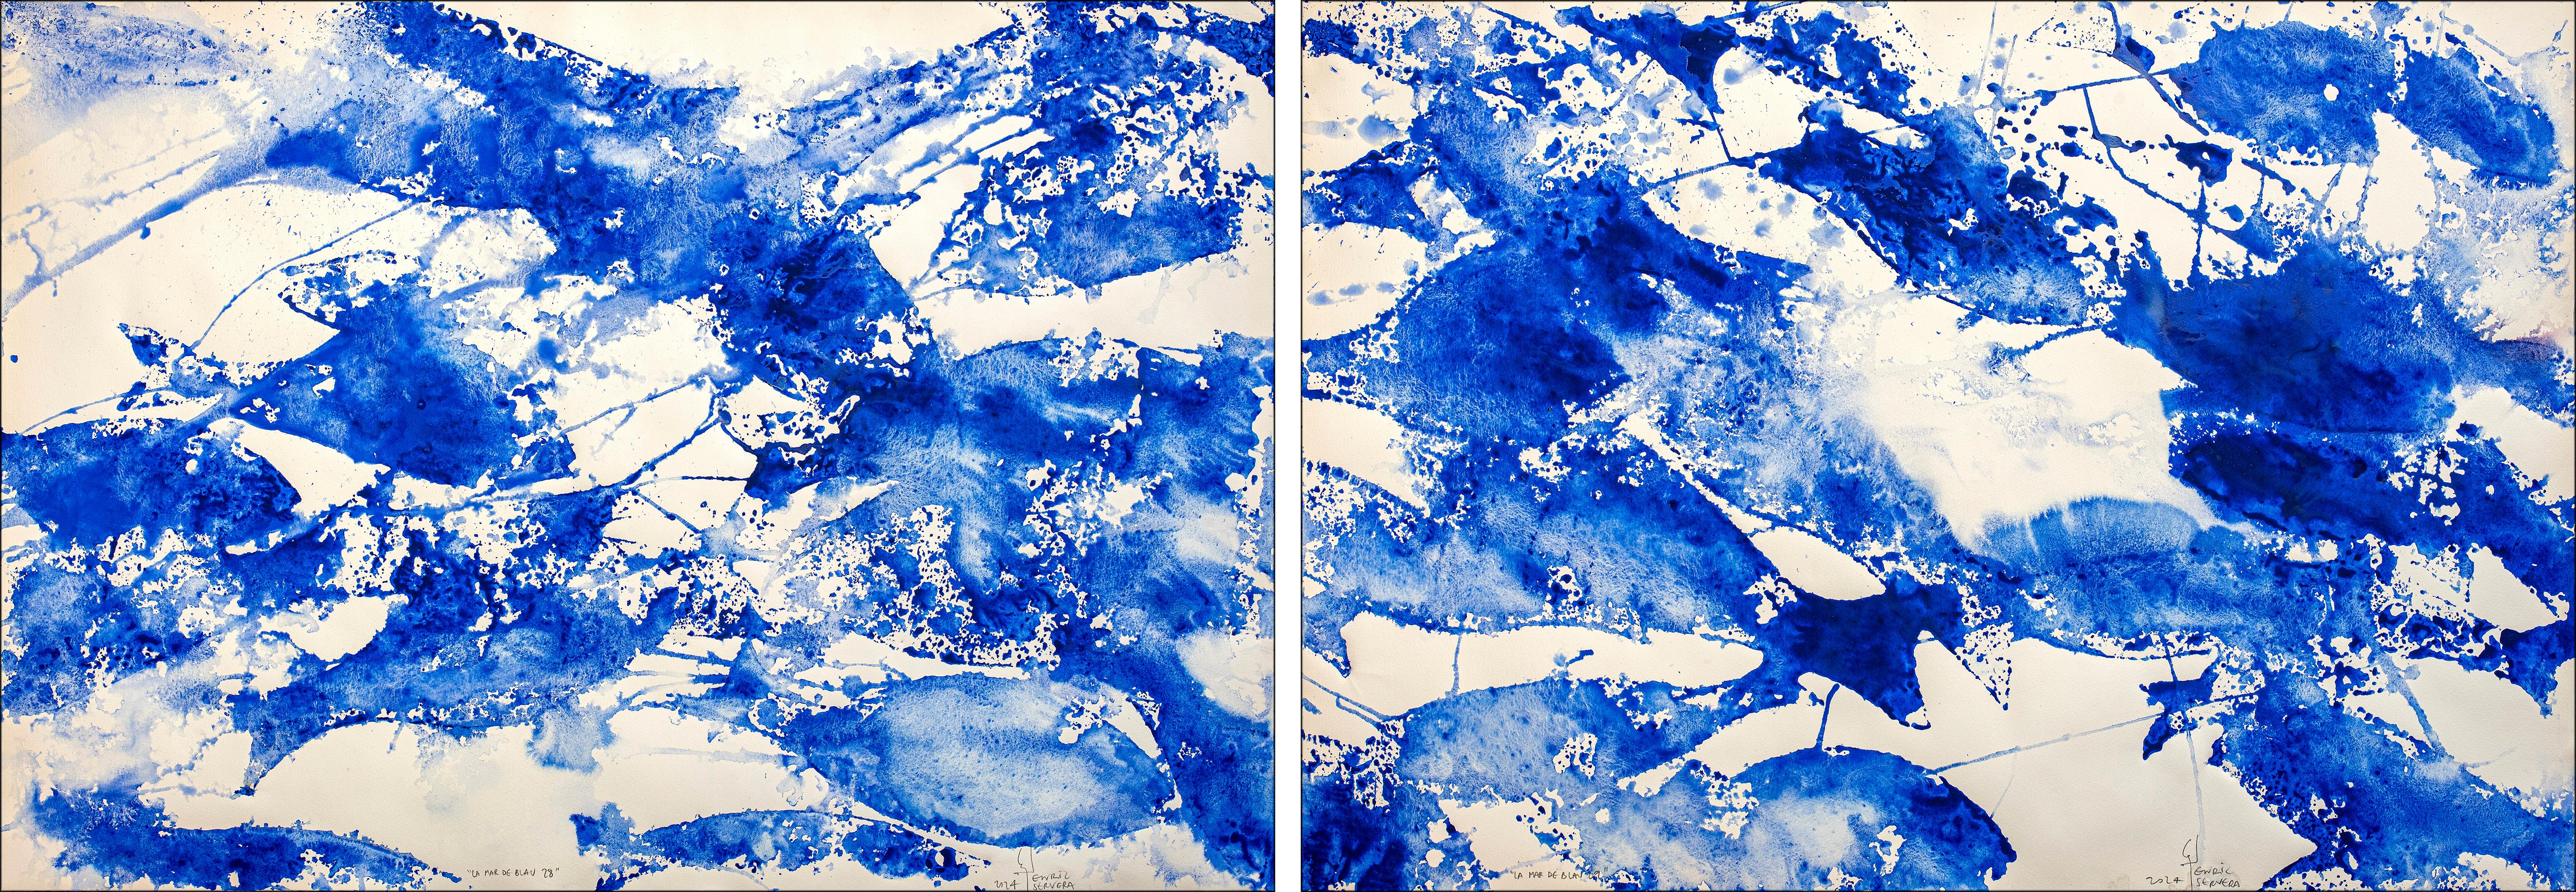 Enric Servera Animal Painting - Sea of Blues Diptych, Abstract Blue & White Fish Patterns, Mediterranean Style 